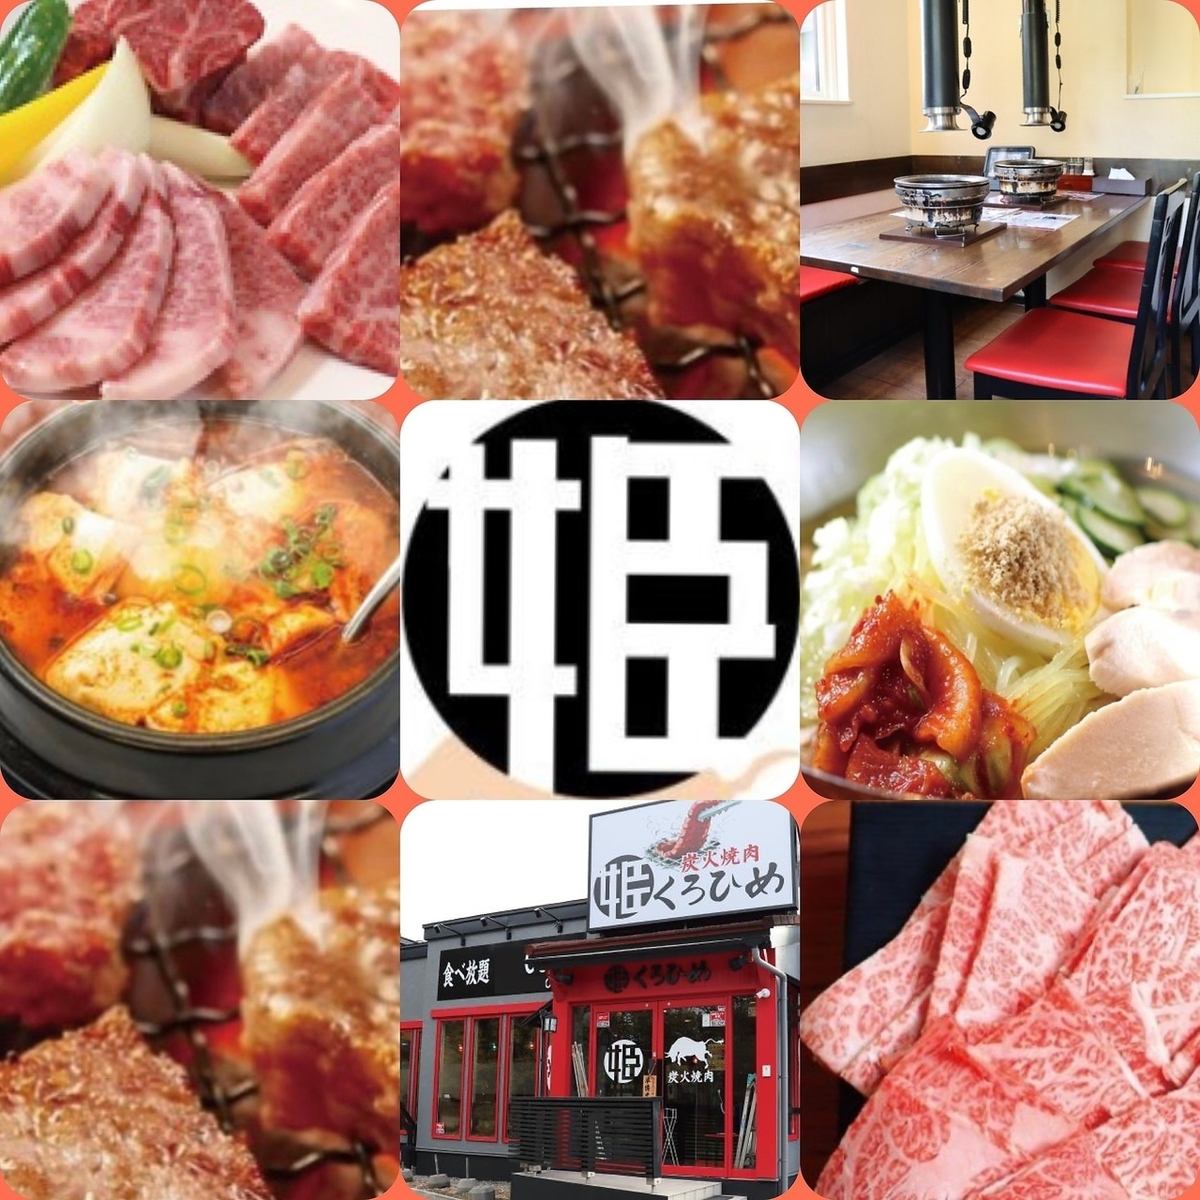 All-you-can-drink at a bargain price! ★ A wagyu yakiniku restaurant directly managed by a butcher shop that is currently gaining popularity.